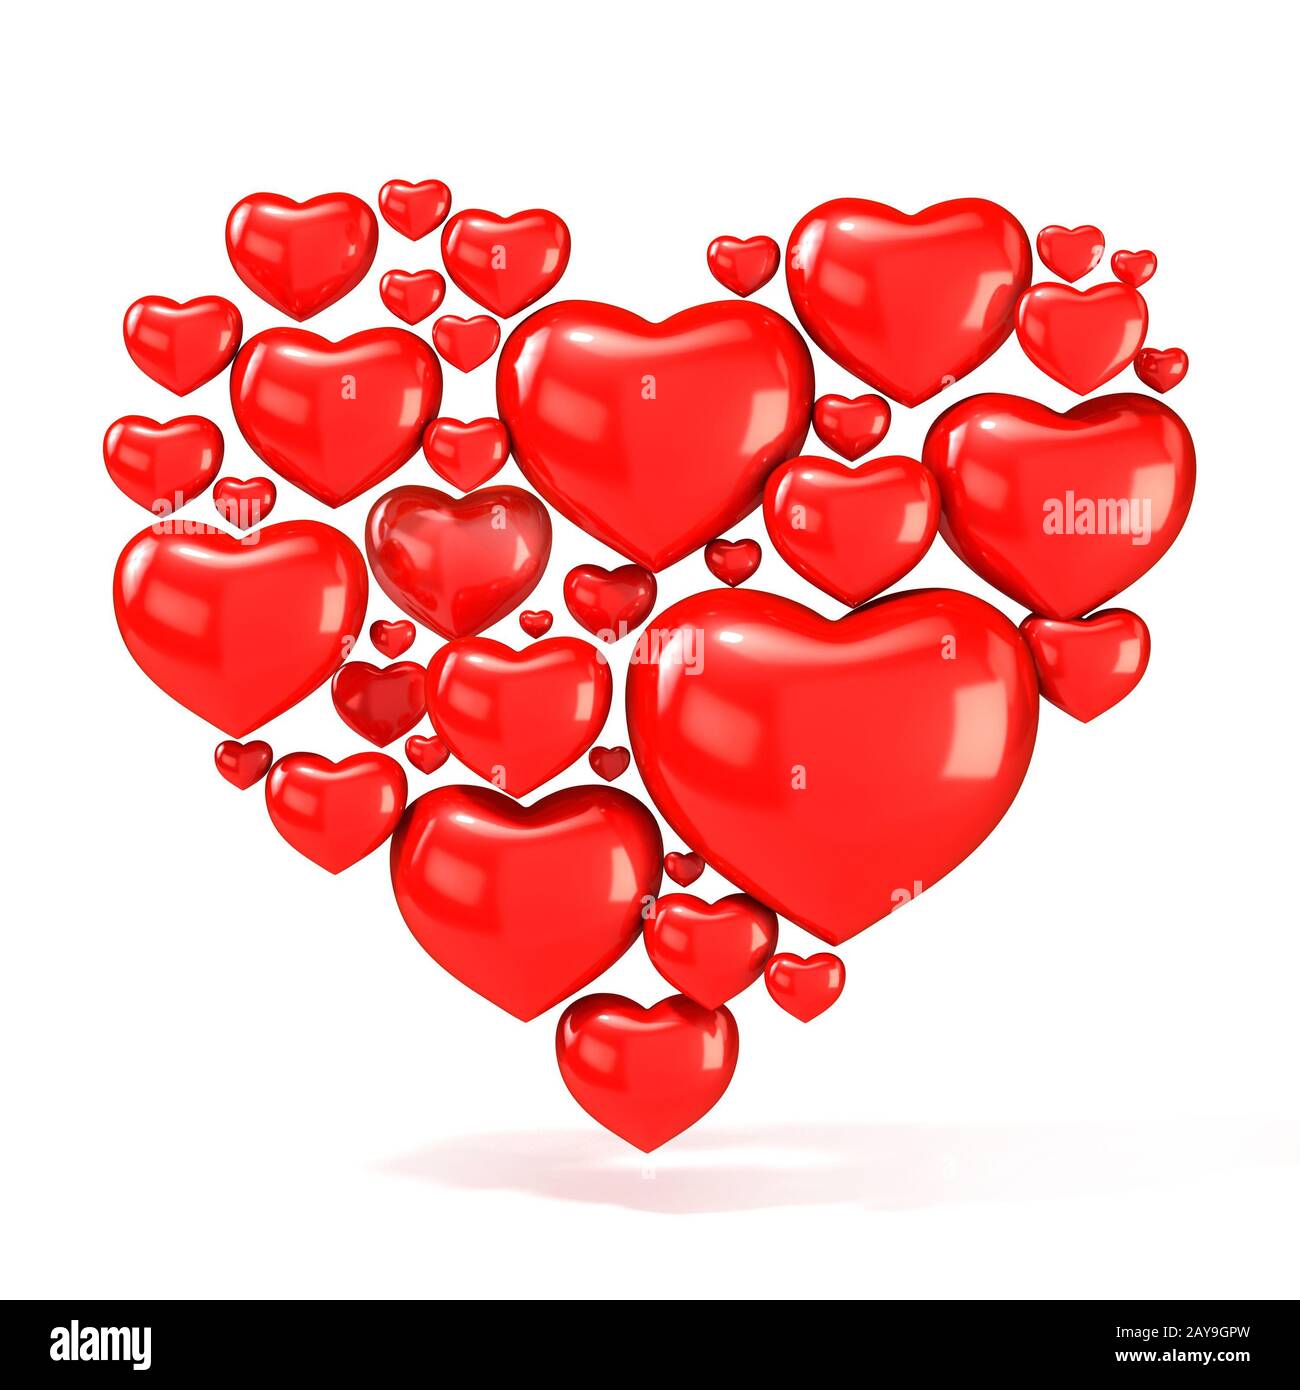 Sweet, red, beautiful hearts on white background, arranged in ...